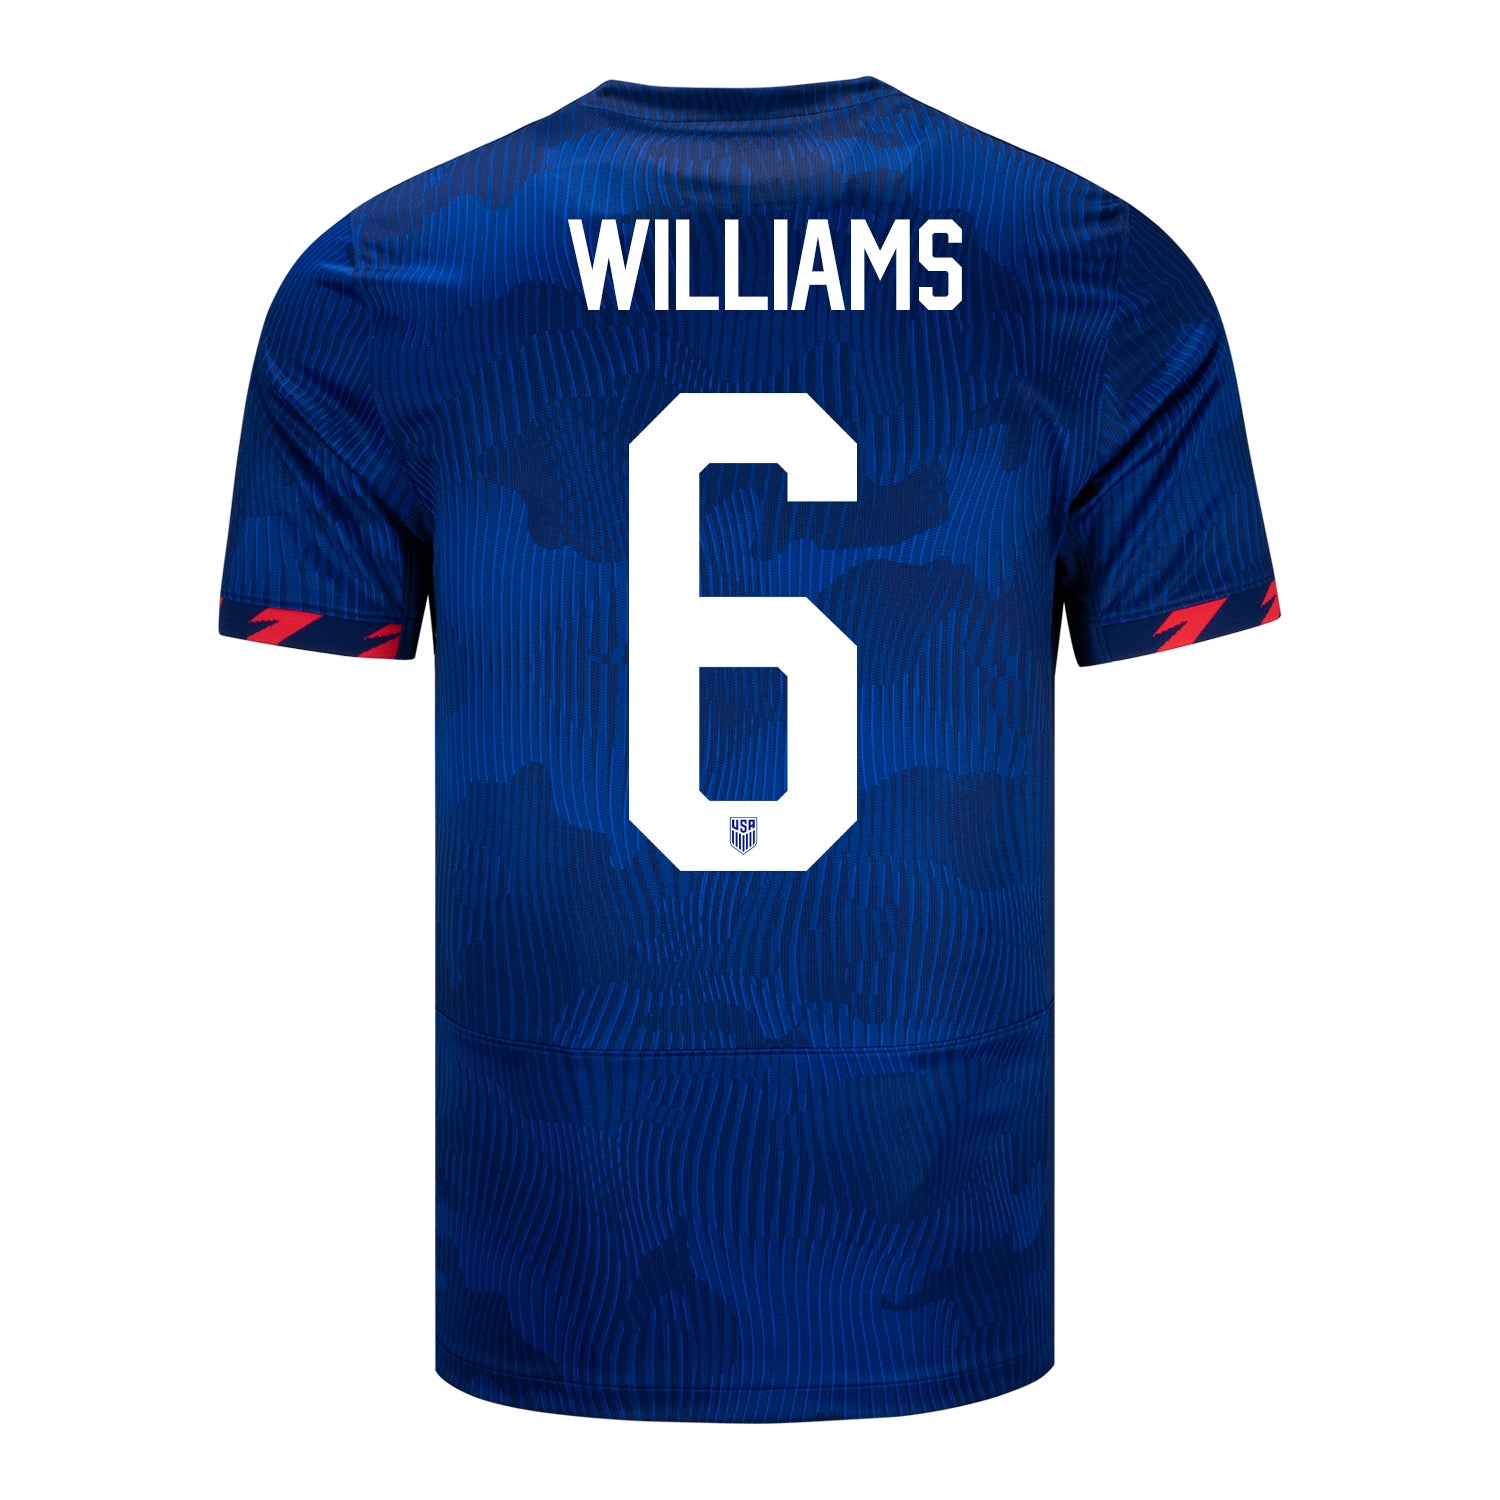 Men's Nike USWNT 2023 Away Personalized Match Jersey in Blue - Back View